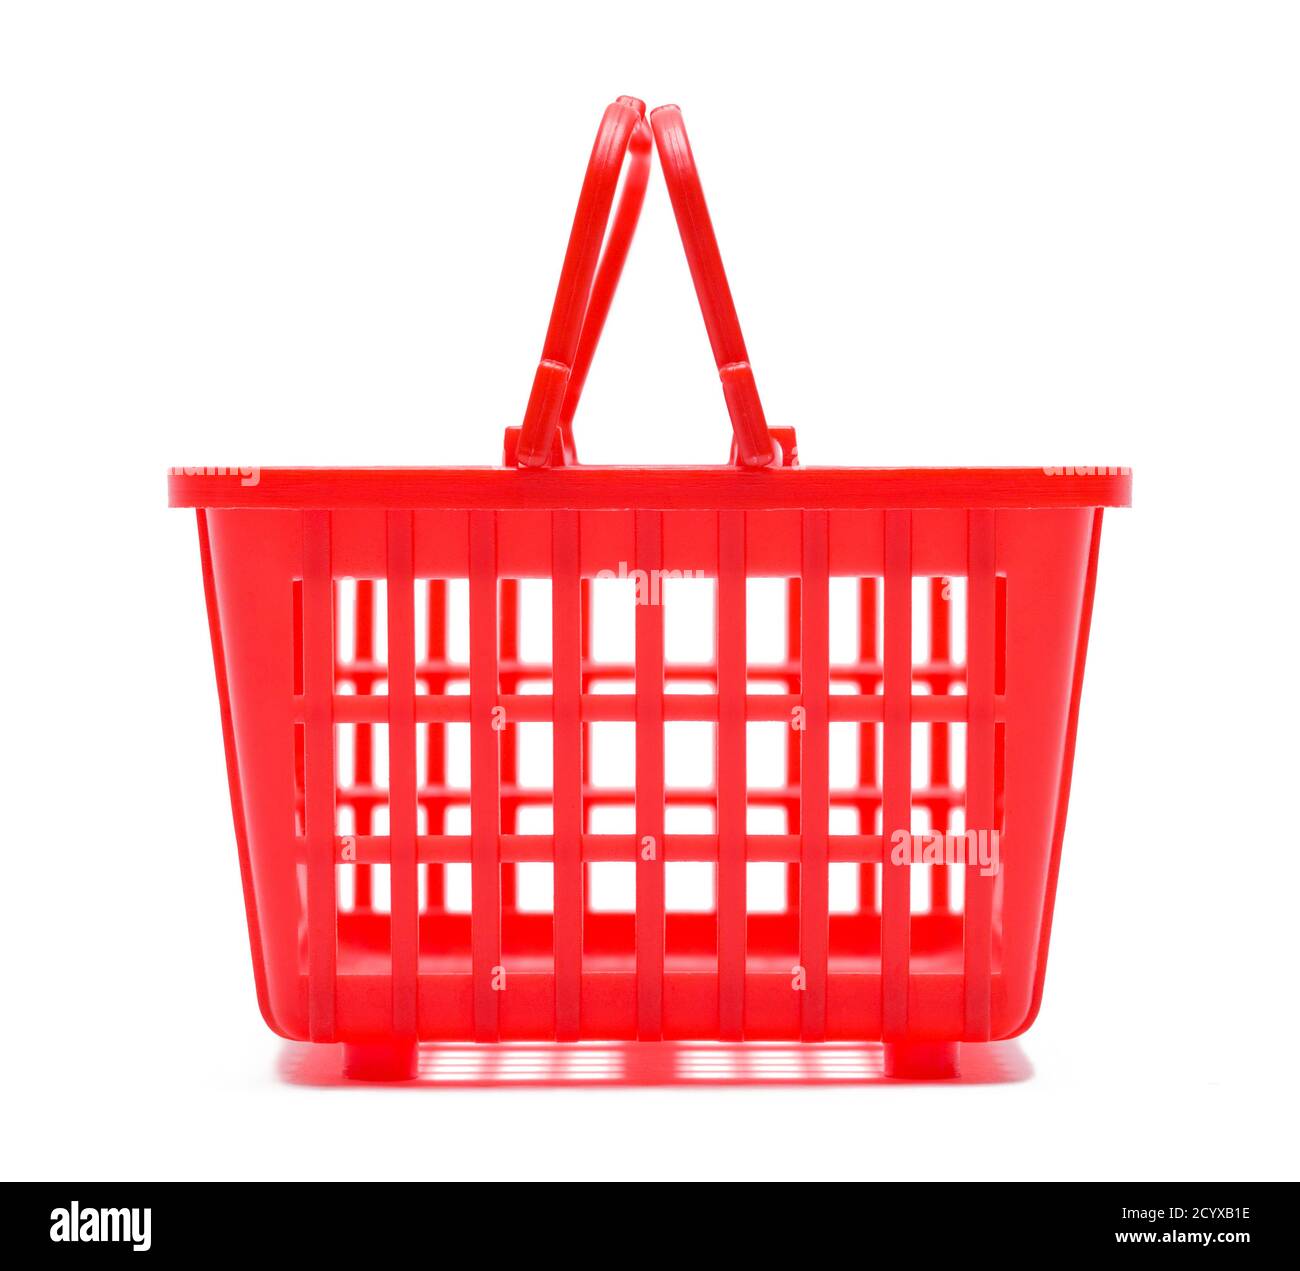 Red Empty Shopping Basket Side View Isolated on White. Stock Photo